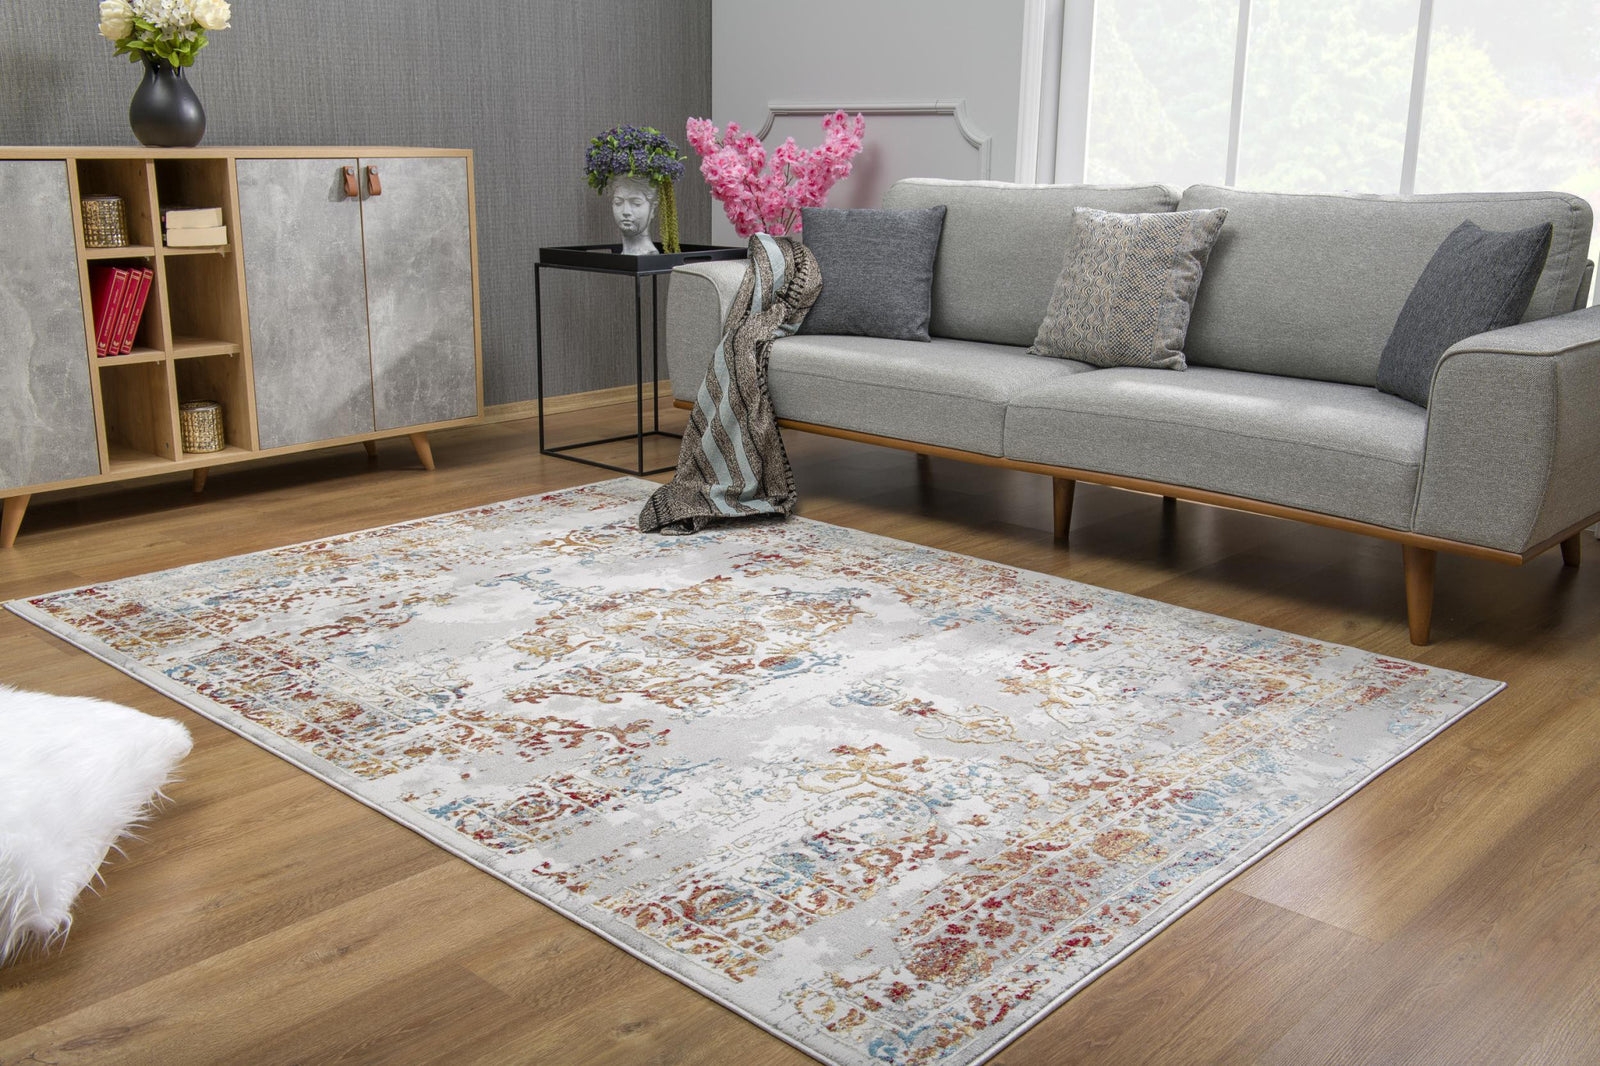 3’ X 5’ Gray And Beige Distressed Ornate Area Rug